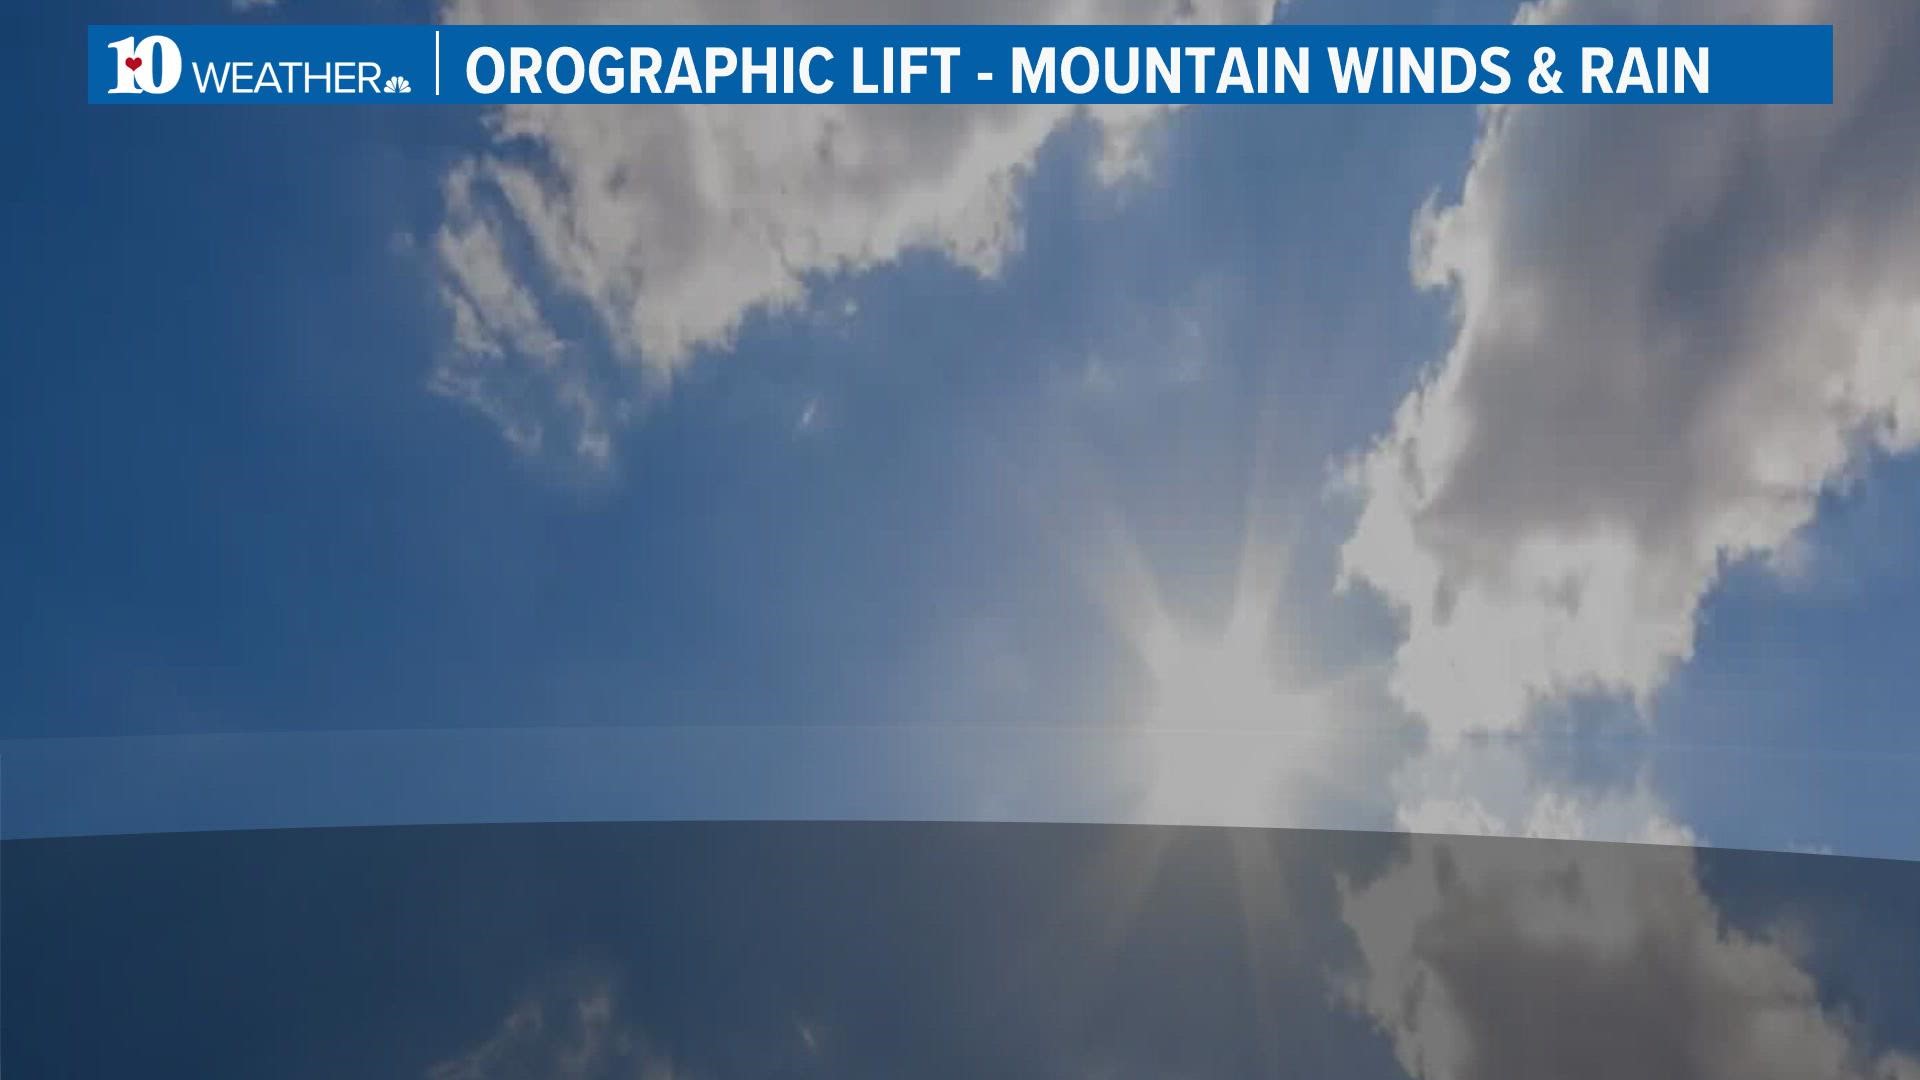 Graphic Detailing orographic lift that makes storms possible